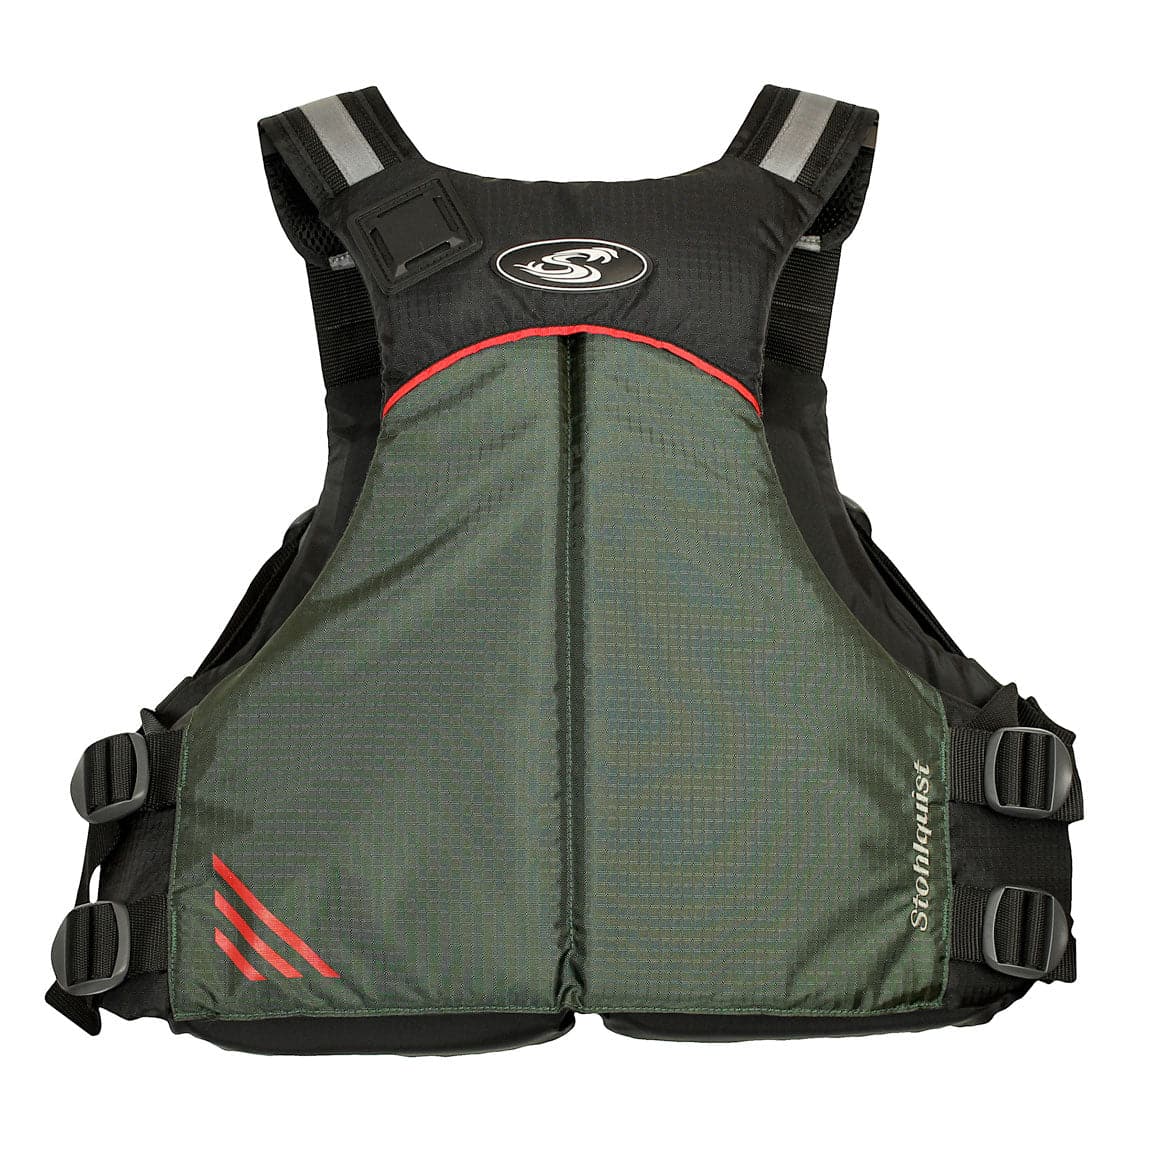 Featuring the Cadence PFD men's pfd manufactured by Stohlquist shown here from a fourth angle.